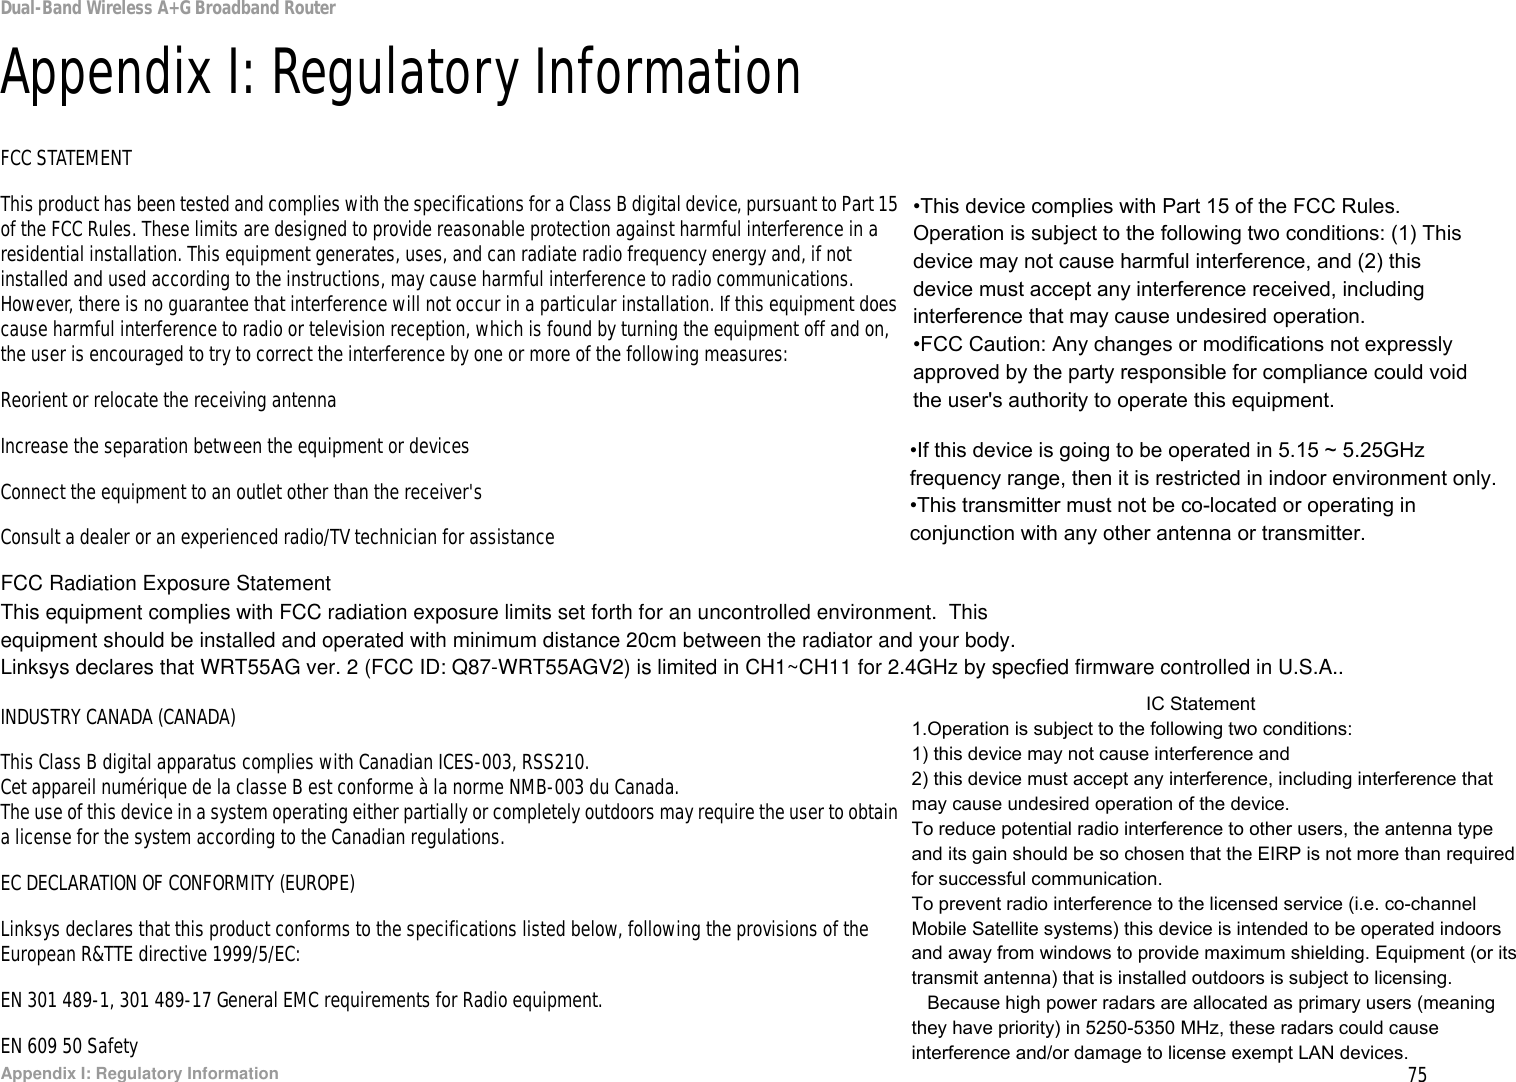 75Appendix I: Regulatory InformationDual-Band Wireless A+G Broadband RouterAppendix I: Regulatory InformationFCC STATEMENTThis product has been tested and complies with the specifications for a Class B digital device, pursuant to Part 15 of the FCC Rules. These limits are designed to provide reasonable protection against harmful interference in a residential installation. This equipment generates, uses, and can radiate radio frequency energy and, if not installed and used according to the instructions, may cause harmful interference to radio communications. However, there is no guarantee that interference will not occur in a particular installation. If this equipment does cause harmful interference to radio or television reception, which is found by turning the equipment off and on, the user is encouraged to try to correct the interference by one or more of the following measures:Reorient or relocate the receiving antennaIncrease the separation between the equipment or devicesConnect the equipment to an outlet other than the receiver&apos;sConsult a dealer or an experienced radio/TV technician for assistanceFCC Radiation Exposure StatementThis equipment complies with FCC radiation exposure limits set forth for an uncontrolled environment.  This equipment should be installed and operated with minimum distance 20cm between the radiator and your body.Linksys declares that WRT55AG ver. 2 (FCC ID: Q87-WRT55AGV2) is limited in CH1~CH11 for 2.4GHz by specfied firmware controlled in U.S.A.. INDUSTRY CANADA (CANADA)This Class B digital apparatus complies with Canadian ICES-003, RSS210.Cet appareil numérique de la classe B est conforme à la norme NMB-003 du Canada.The use of this device in a system operating either partially or completely outdoors may require the user to obtain a license for the system according to the Canadian regulations.EC DECLARATION OF CONFORMITY (EUROPE)Linksys declares that this product conforms to the specifications listed below, following the provisions of the European R&amp;TTE directive 1999/5/EC: EN 301 489-1, 301 489-17 General EMC requirements for Radio equipment.EN 609 50 Safety•This device complies with Part 15 of the FCC Rules. Operation is subject to the following two conditions: (1) This device may not cause harmful interference, and (2) this device must accept any interference received, including interference that may cause undesired operation.•FCC Caution: Any changes or modifications not expressly approved by the party responsible for compliance could void the user&apos;s authority to operate this equipment.•If this device is going to be operated in 5.15 ~ 5.25GHz frequency range, then it is restricted in indoor environment only.•This transmitter must not be co-located or operating in conjunction with any other antenna or transmitter.                                             IC Statement1.Operation is subject to the following two conditions:1) this device may not cause interference and2) this device must accept any interference, including interference that may cause undesired operation of the device.To reduce potential radio interference to other users, the antenna type and its gain should be so chosen that the EIRP is not more than required for successful communication.To prevent radio interference to the licensed service (i.e. co-channel Mobile Satellite systems) this device is intended to be operated indoors and away from windows to provide maximum shielding. Equipment (or its transmit antenna) that is installed outdoors is subject to licensing.   Because high power radars are allocated as primary users (meaning they have priority) in 5250-5350 MHz, these radars could cause interference and/or damage to license exempt LAN devices.